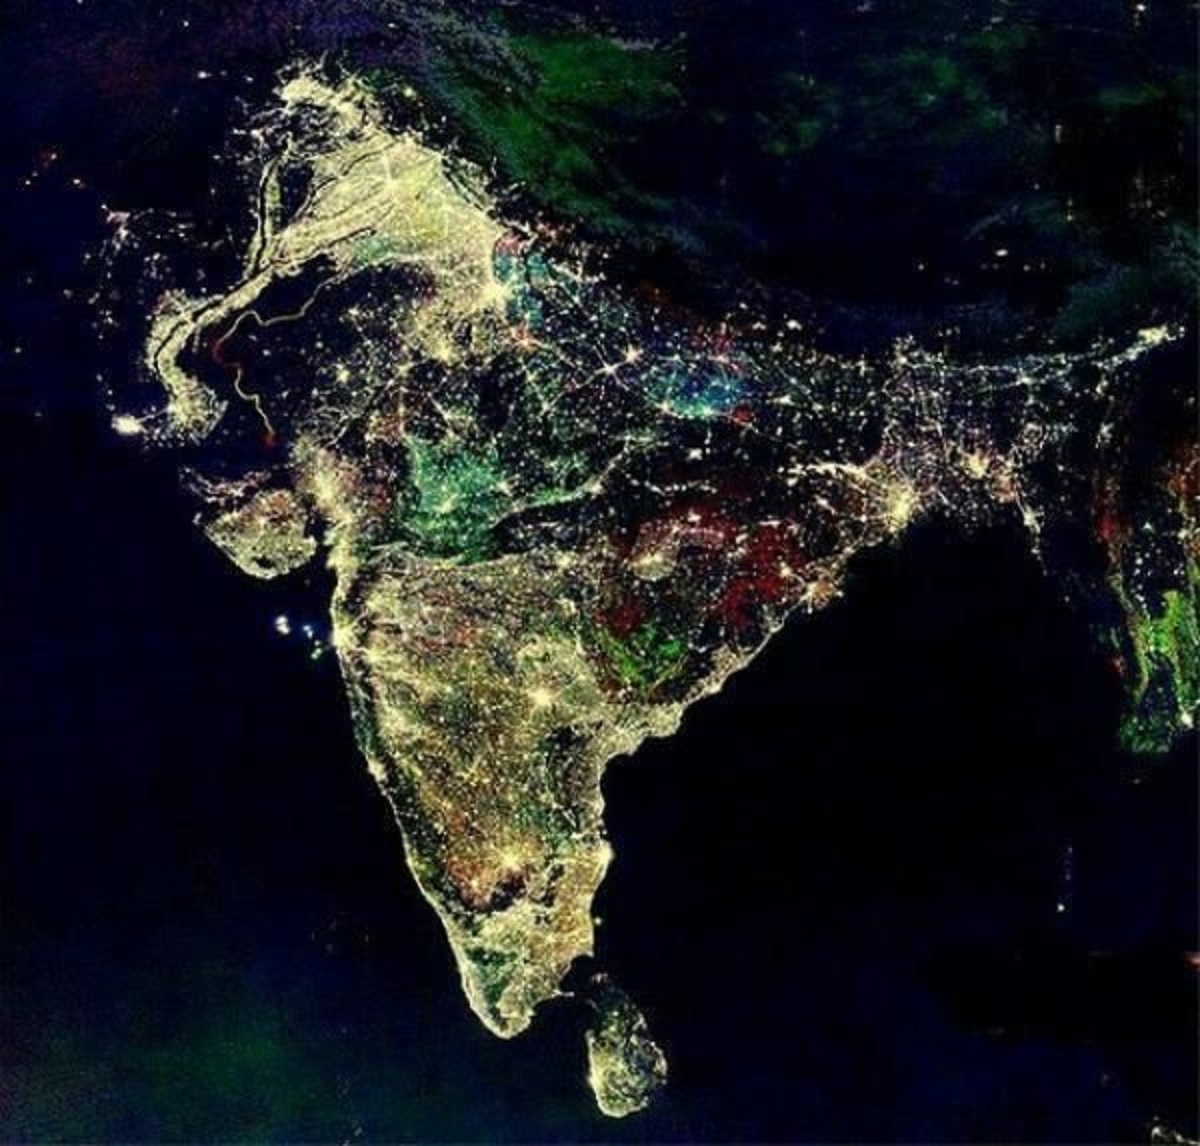 No Nasa Has Not Yet Released Any Image Of India Lighting Diyas On